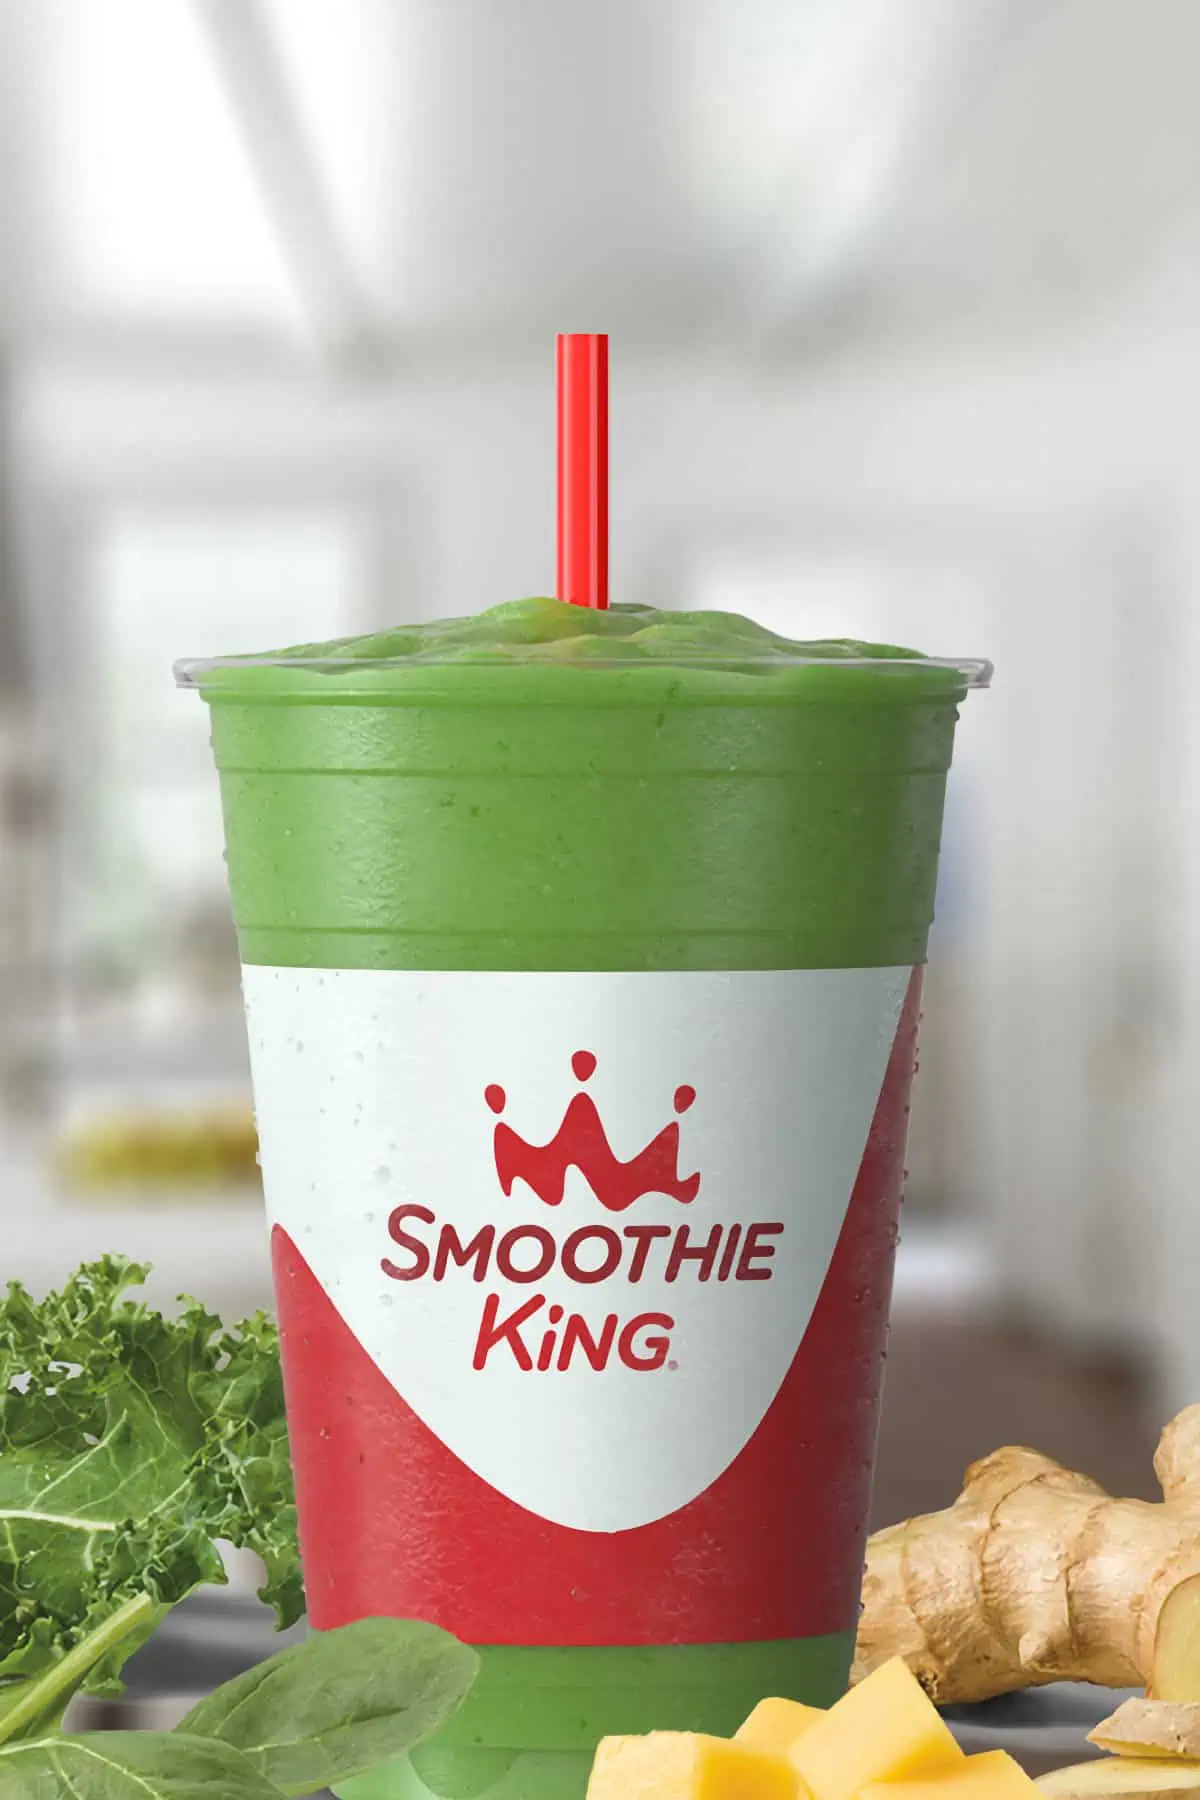 Smoothie King Slim-N-Trim Veggie smoothie in a glass, on my kitchen counter, surrounded by fresh vegetables.